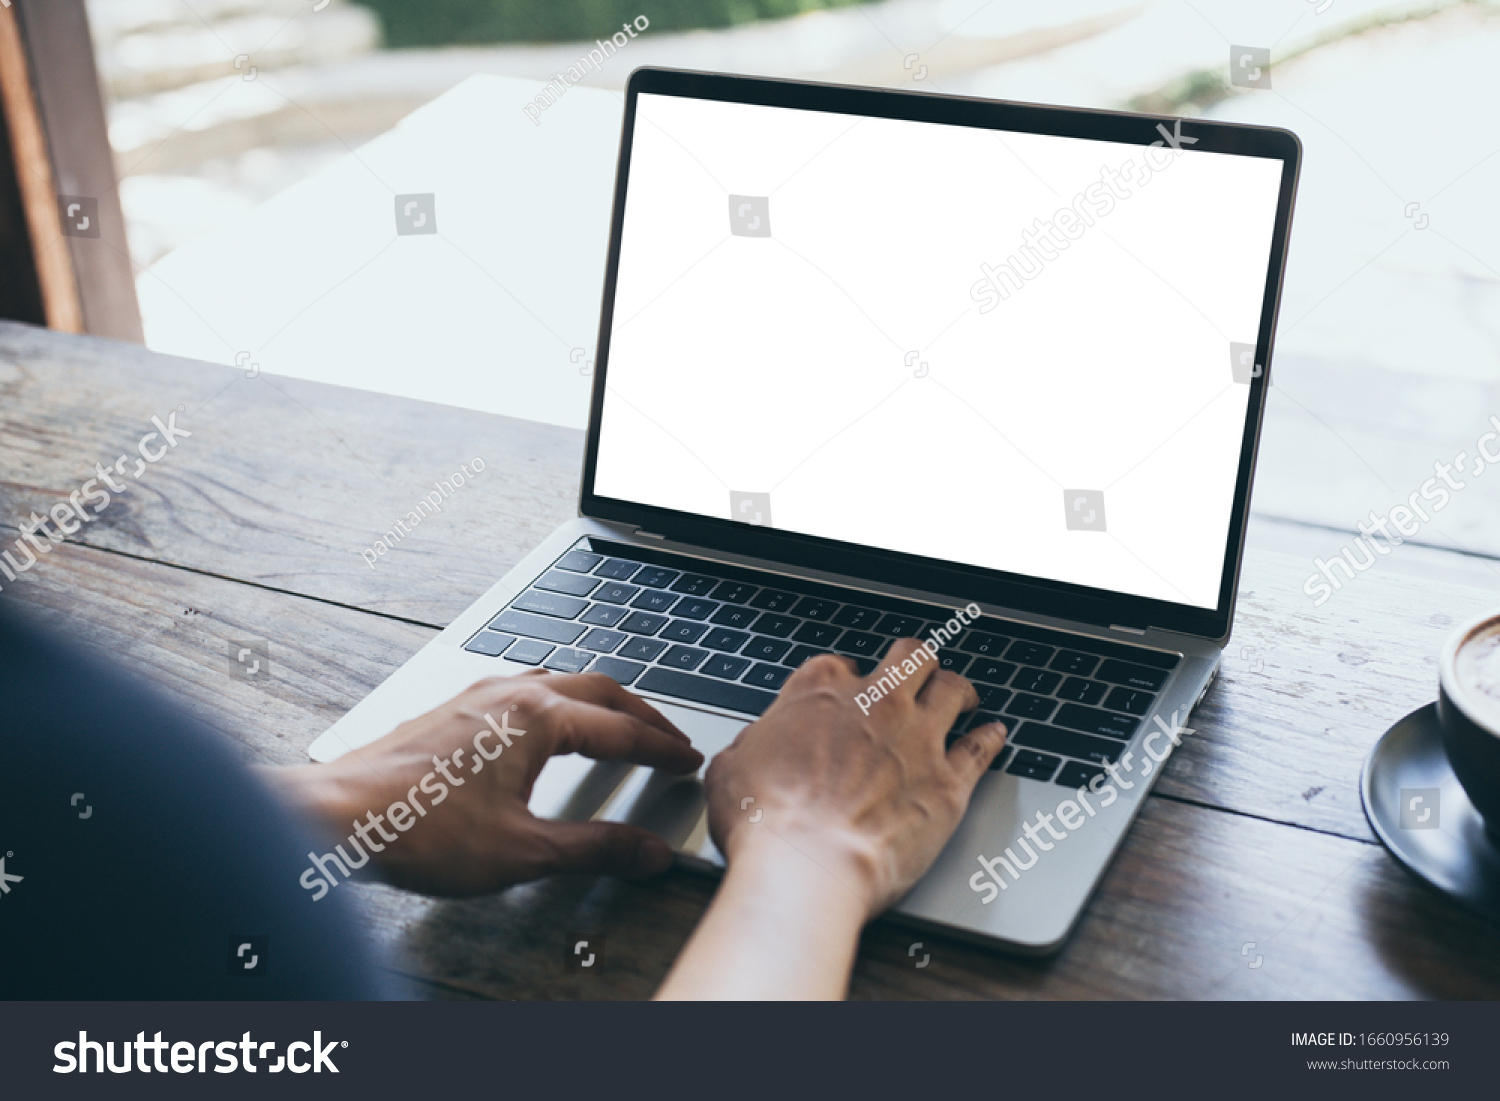 computer mockup image blank screen with white background for advertising text,hand woman using laptop contact business search information on desk at coffee shop.marketing and creative design #1660956139